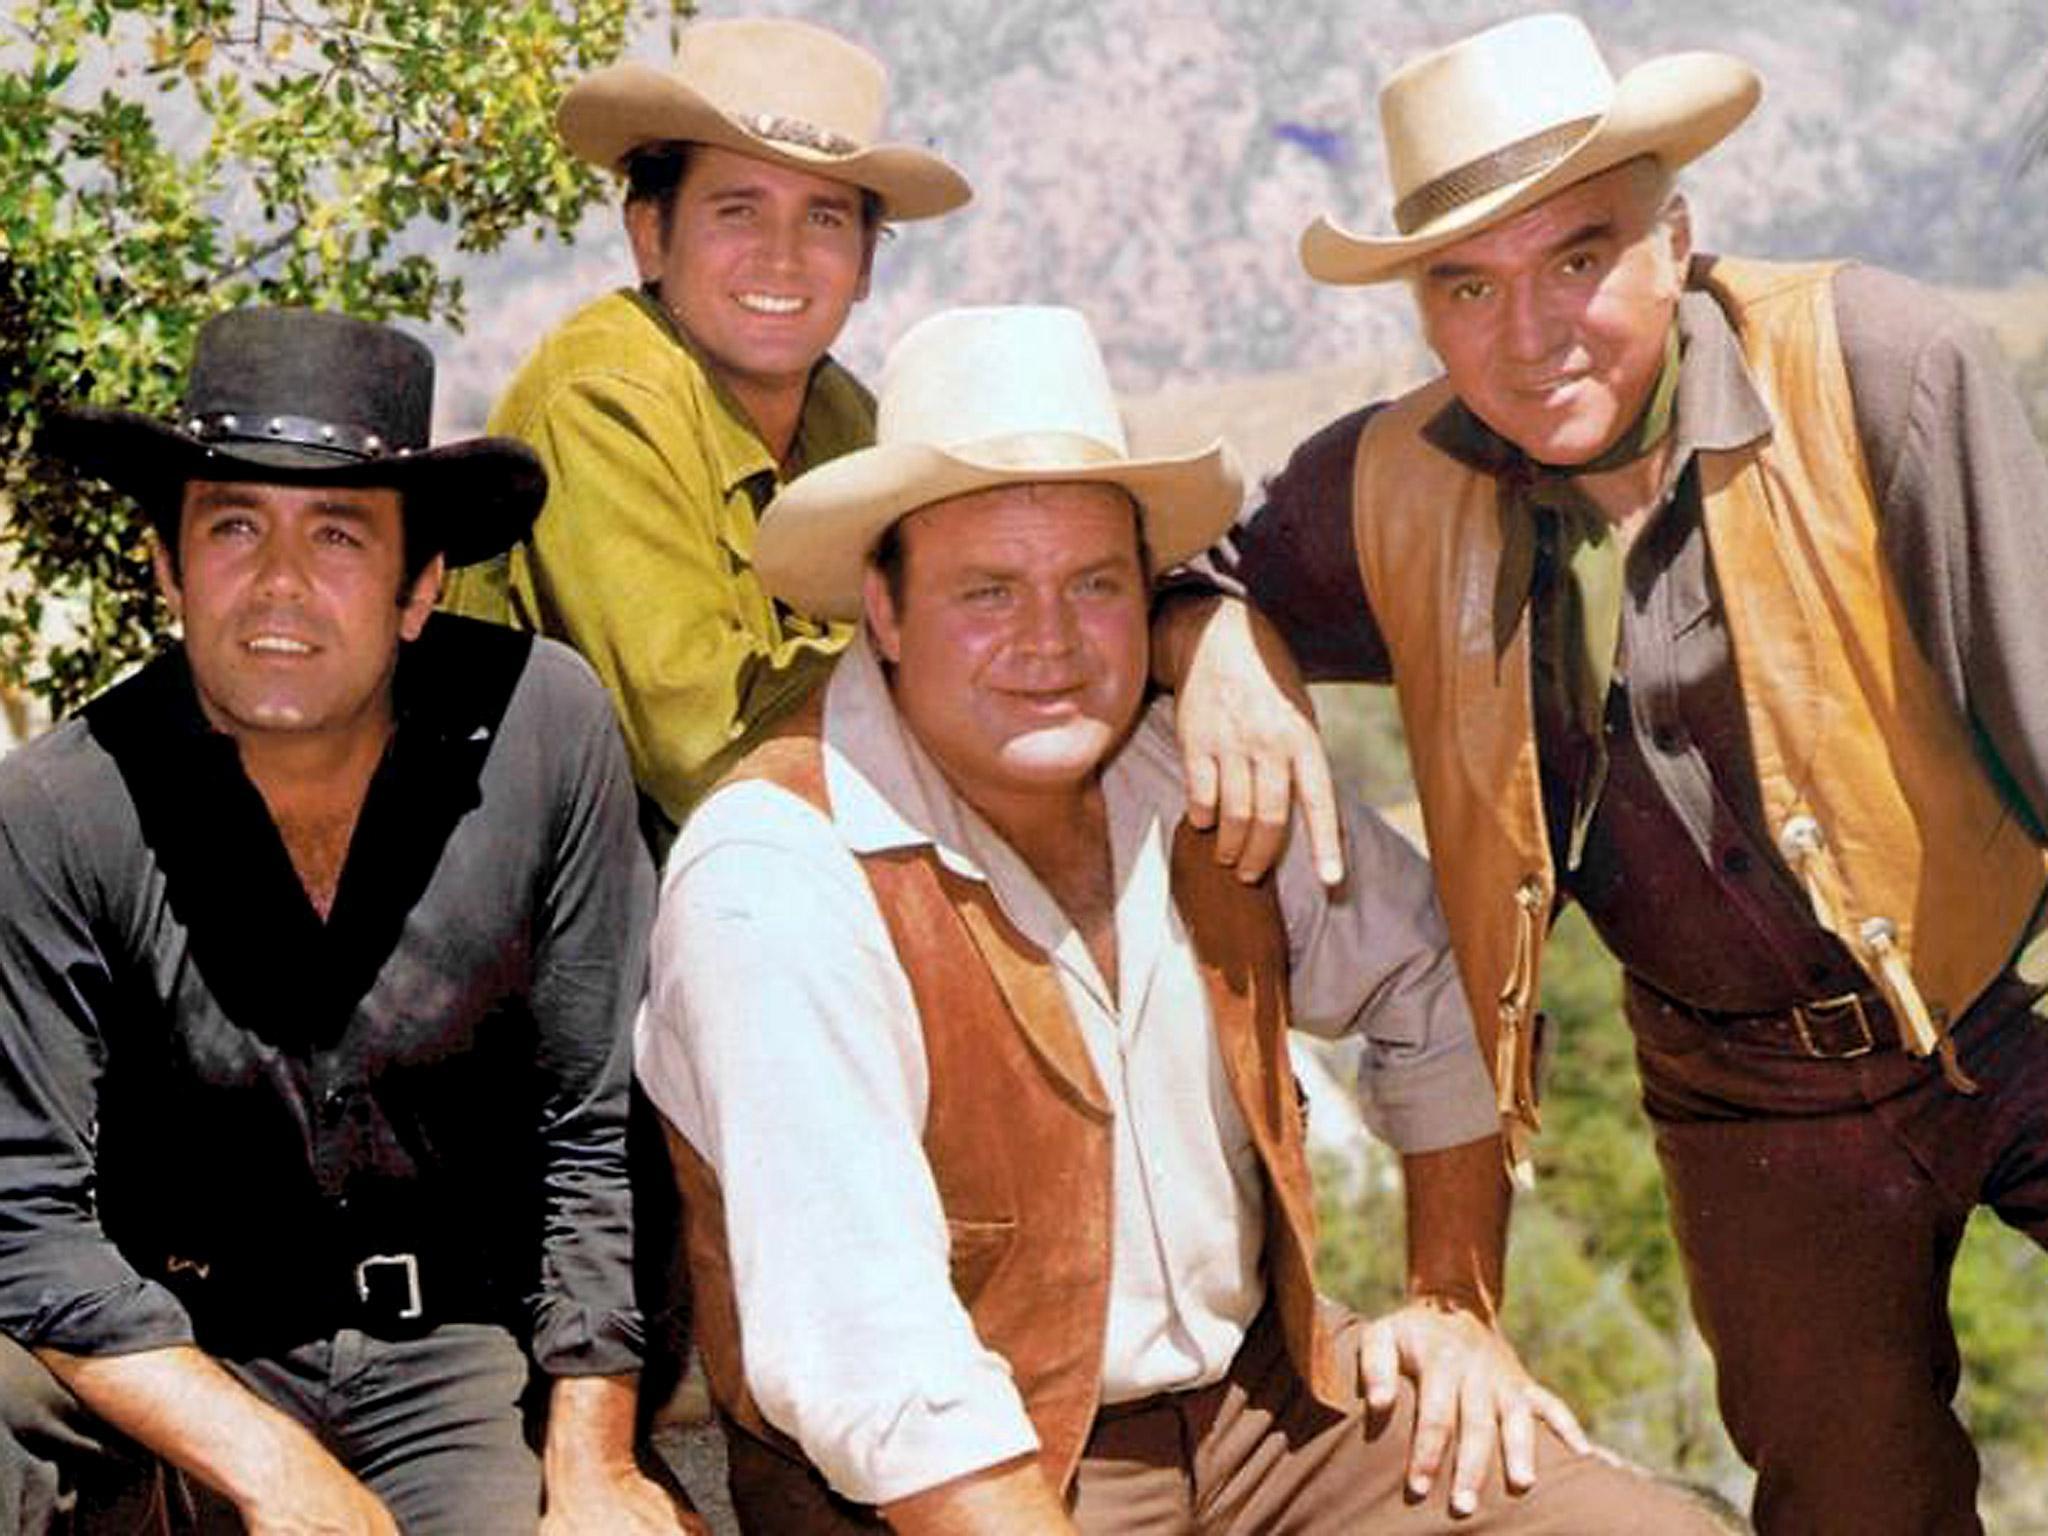 The 12 greatest TV westerns of all time, from Deadwood to Maverick